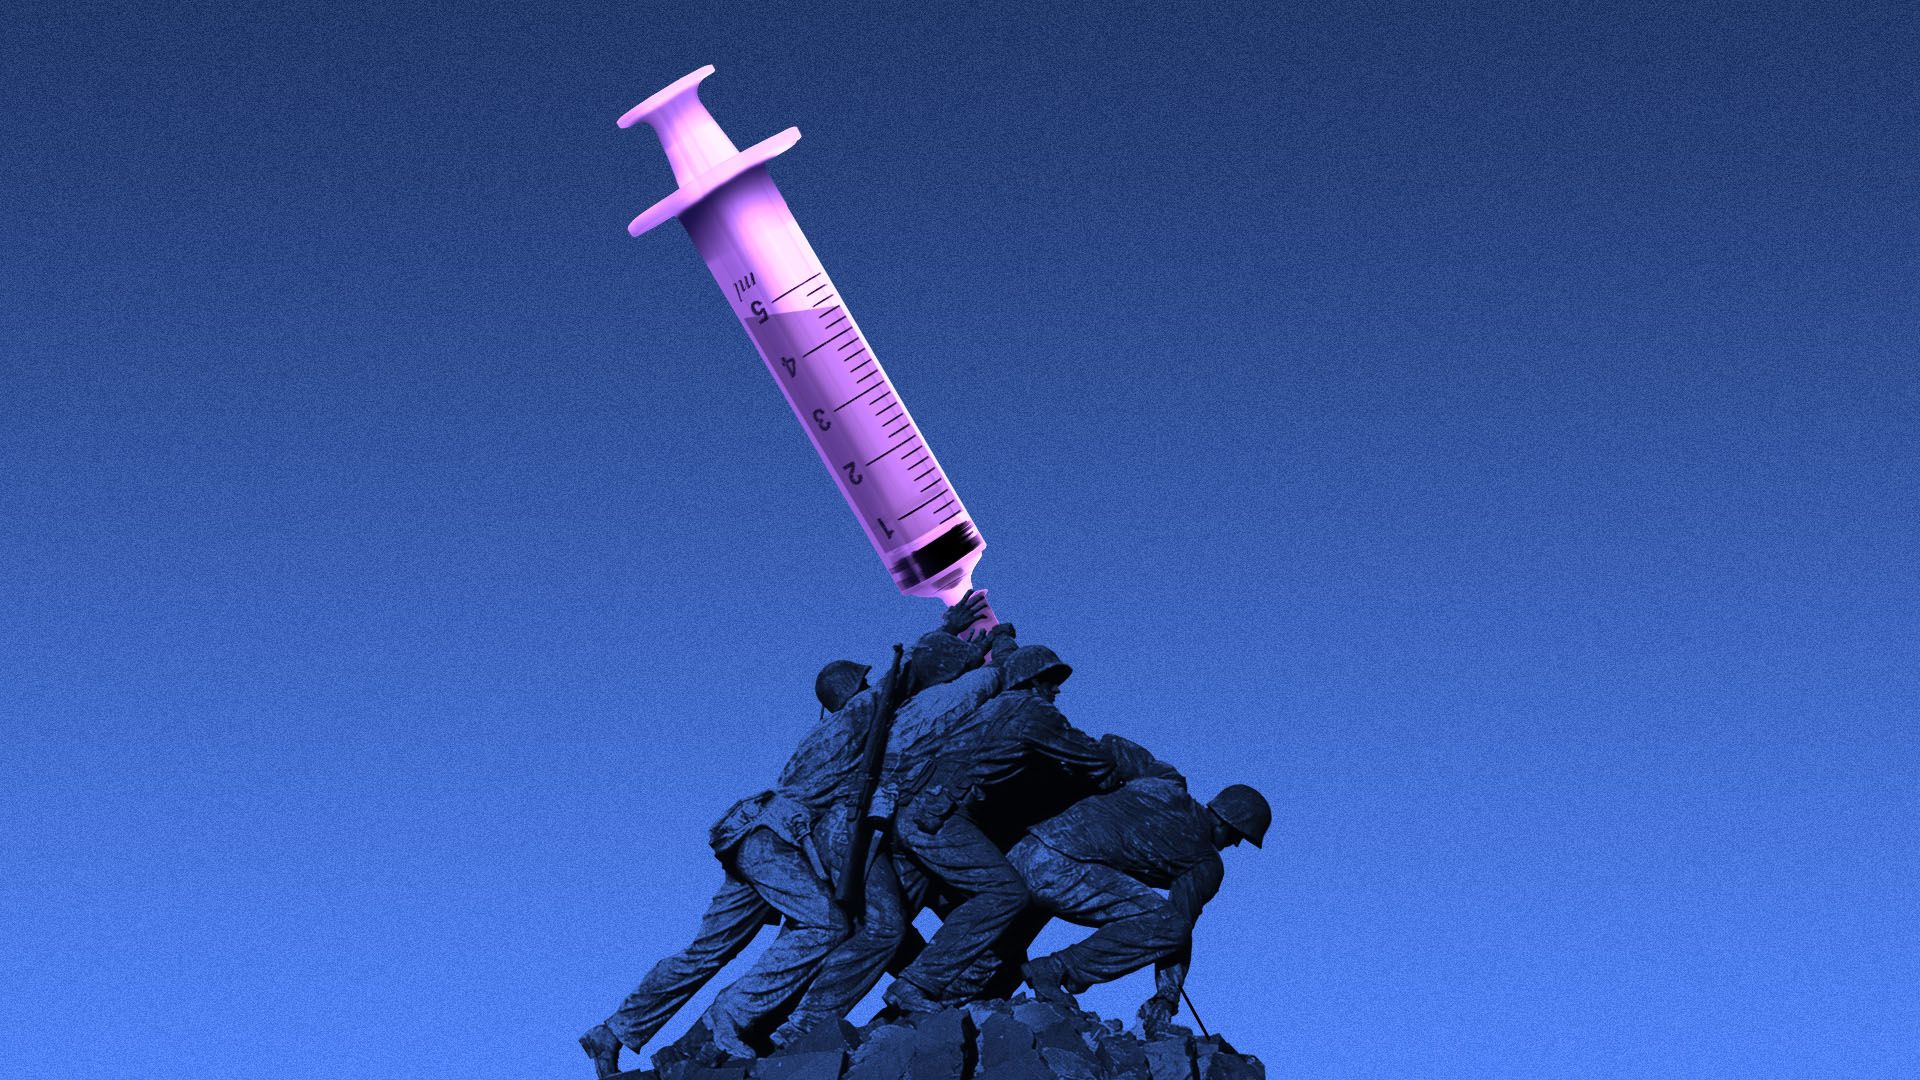 Illustration of the soldiers at Iwo Jima planting a medical syringe 